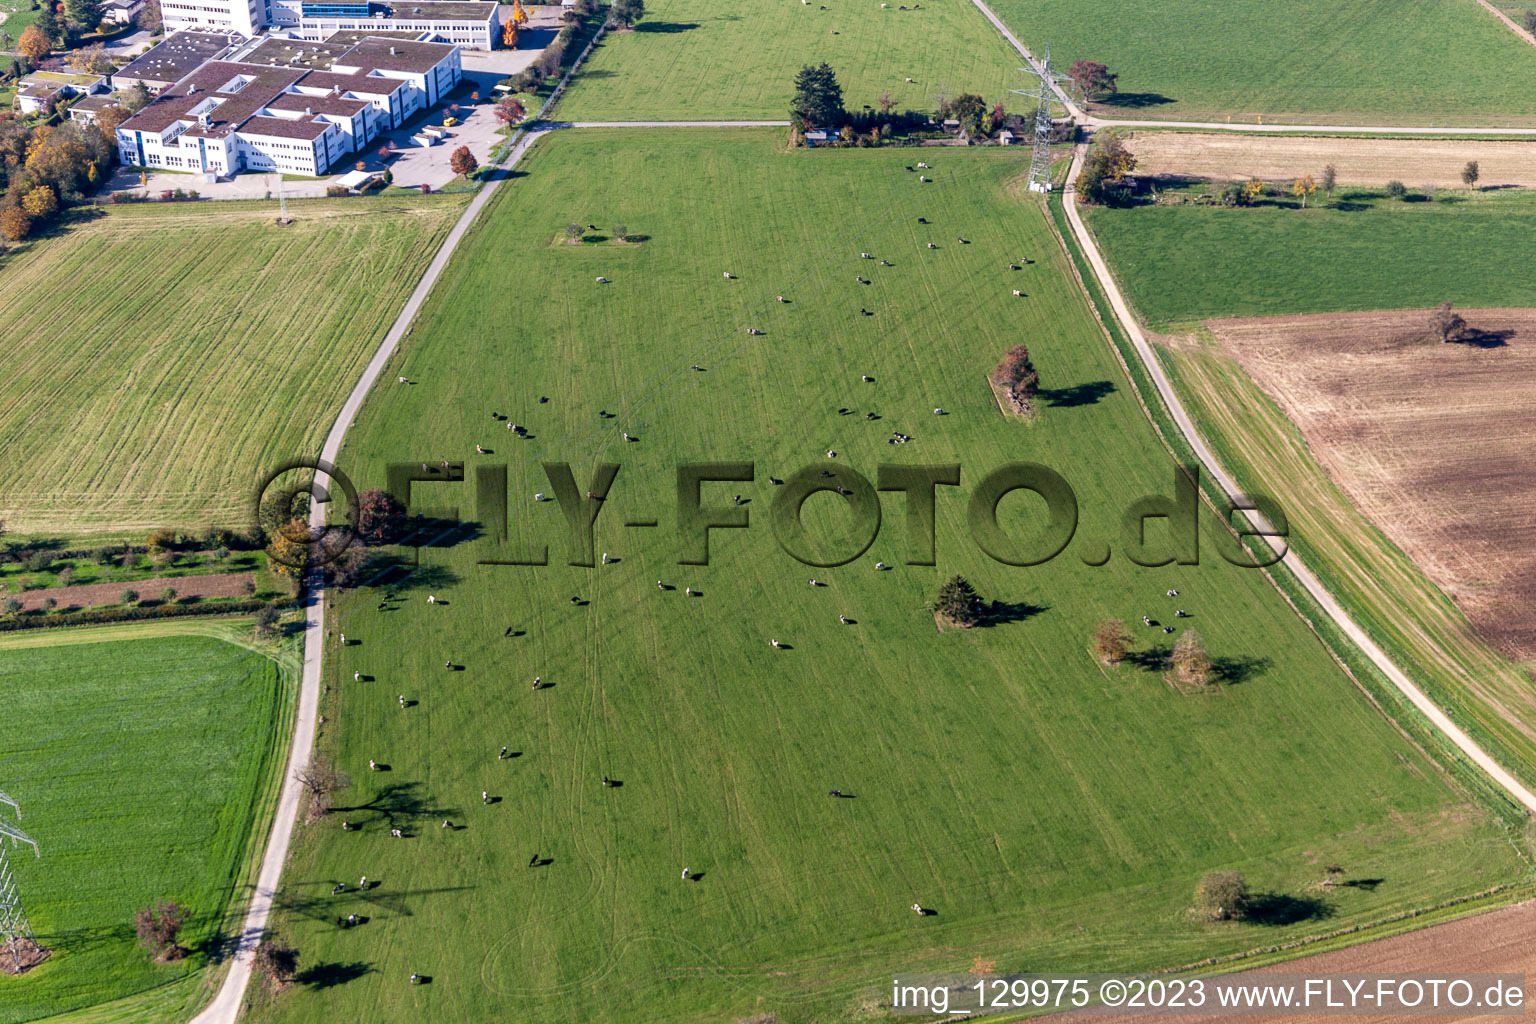 Cattle pasture in the district Langensteinbach in Karlsbad in the state Baden-Wuerttemberg, Germany